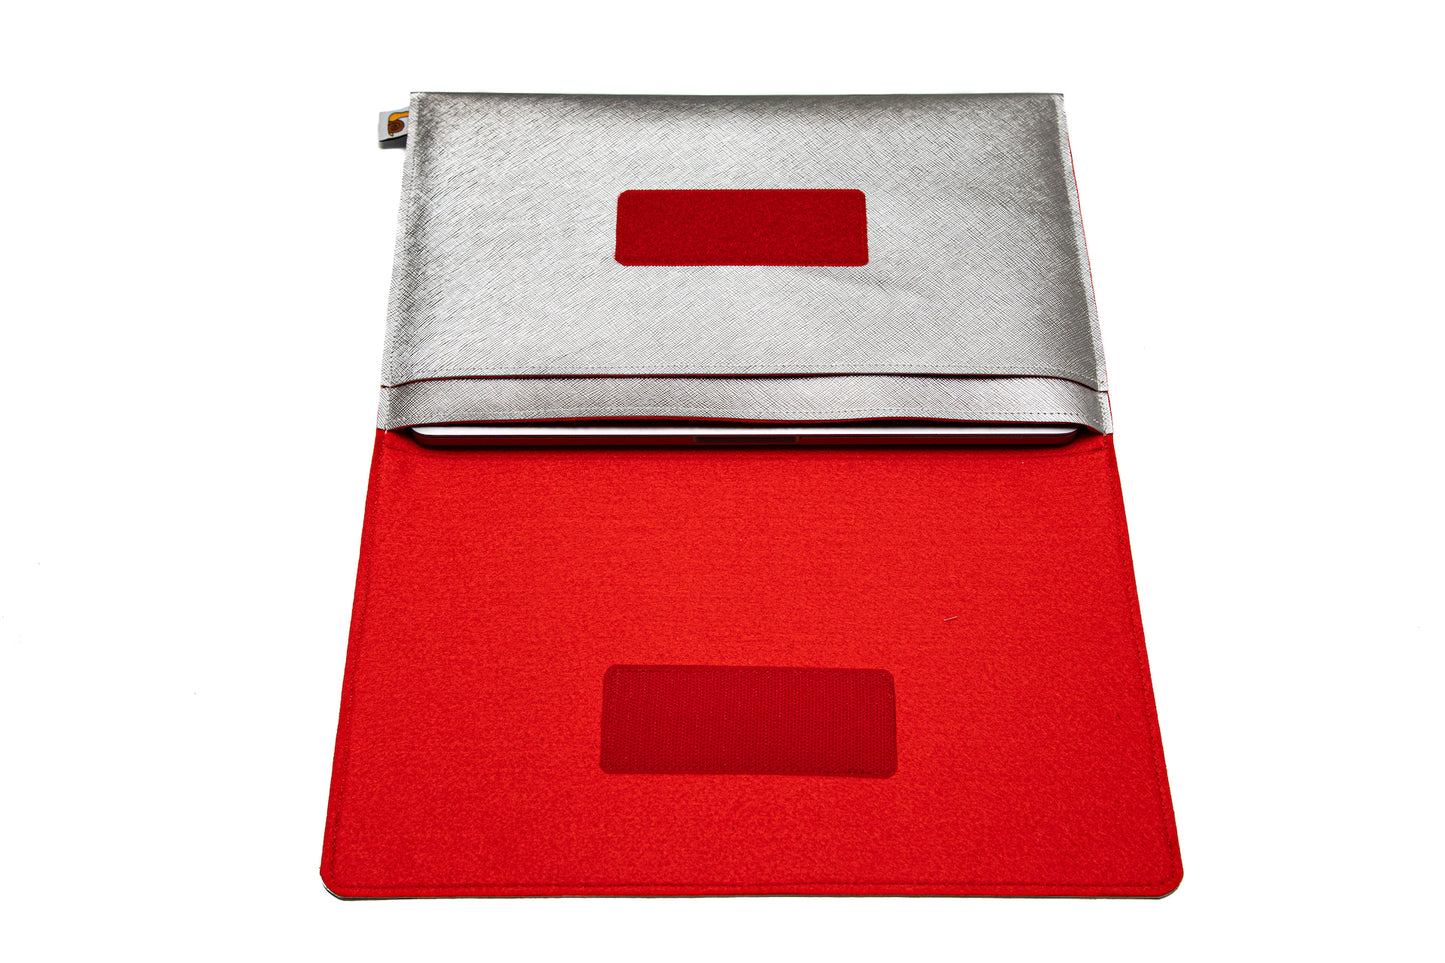 Handmade MacBook Cover - Silver & Red